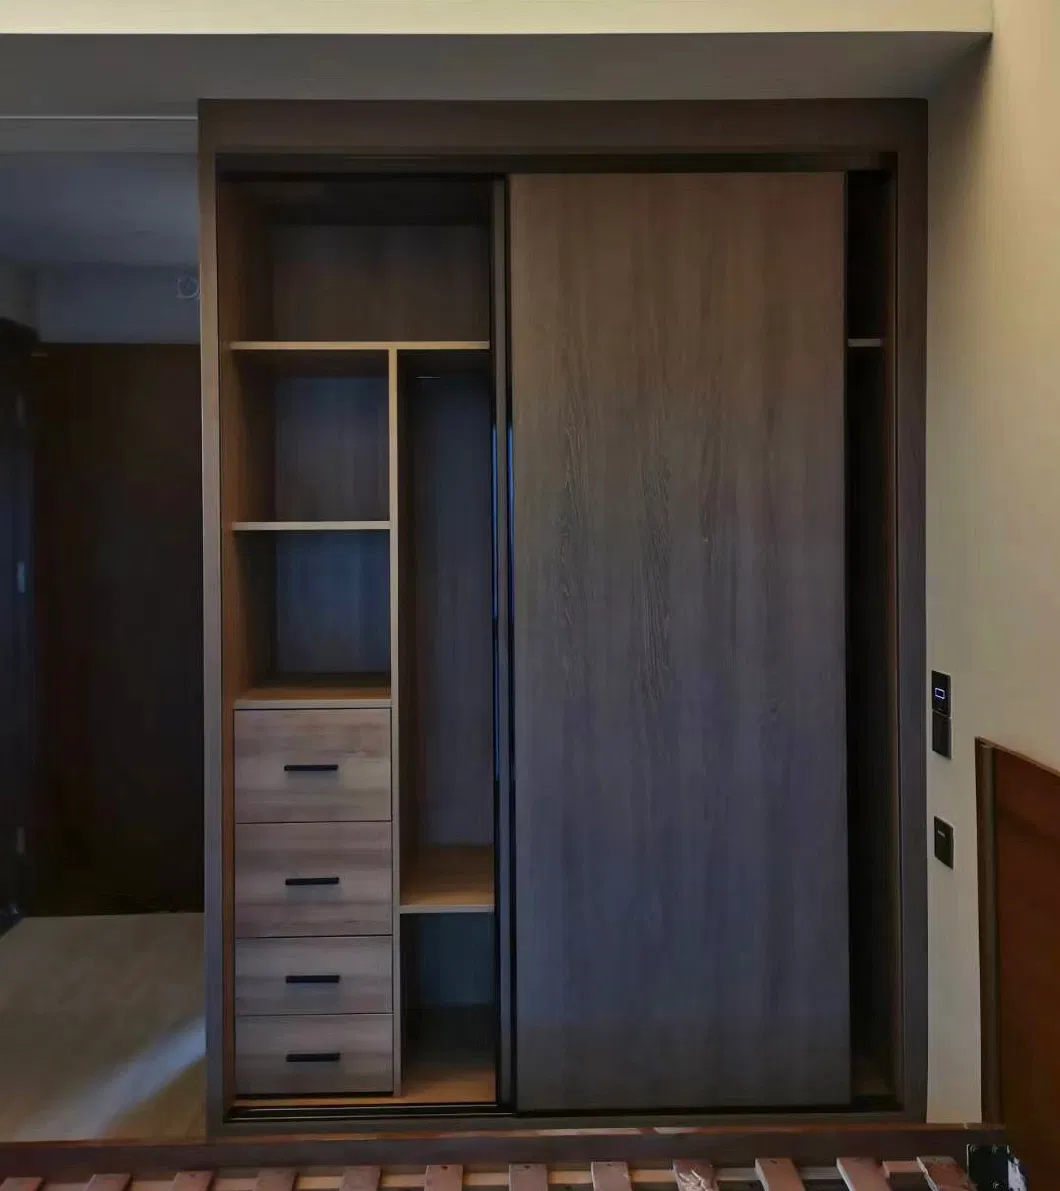 Whole House Customized Chinese Factory Direct Sales of Modern Fashion Wardrobes, Customized Wardrobes, Cloakrooms, Changing Rooms, and Bedroom Furniture